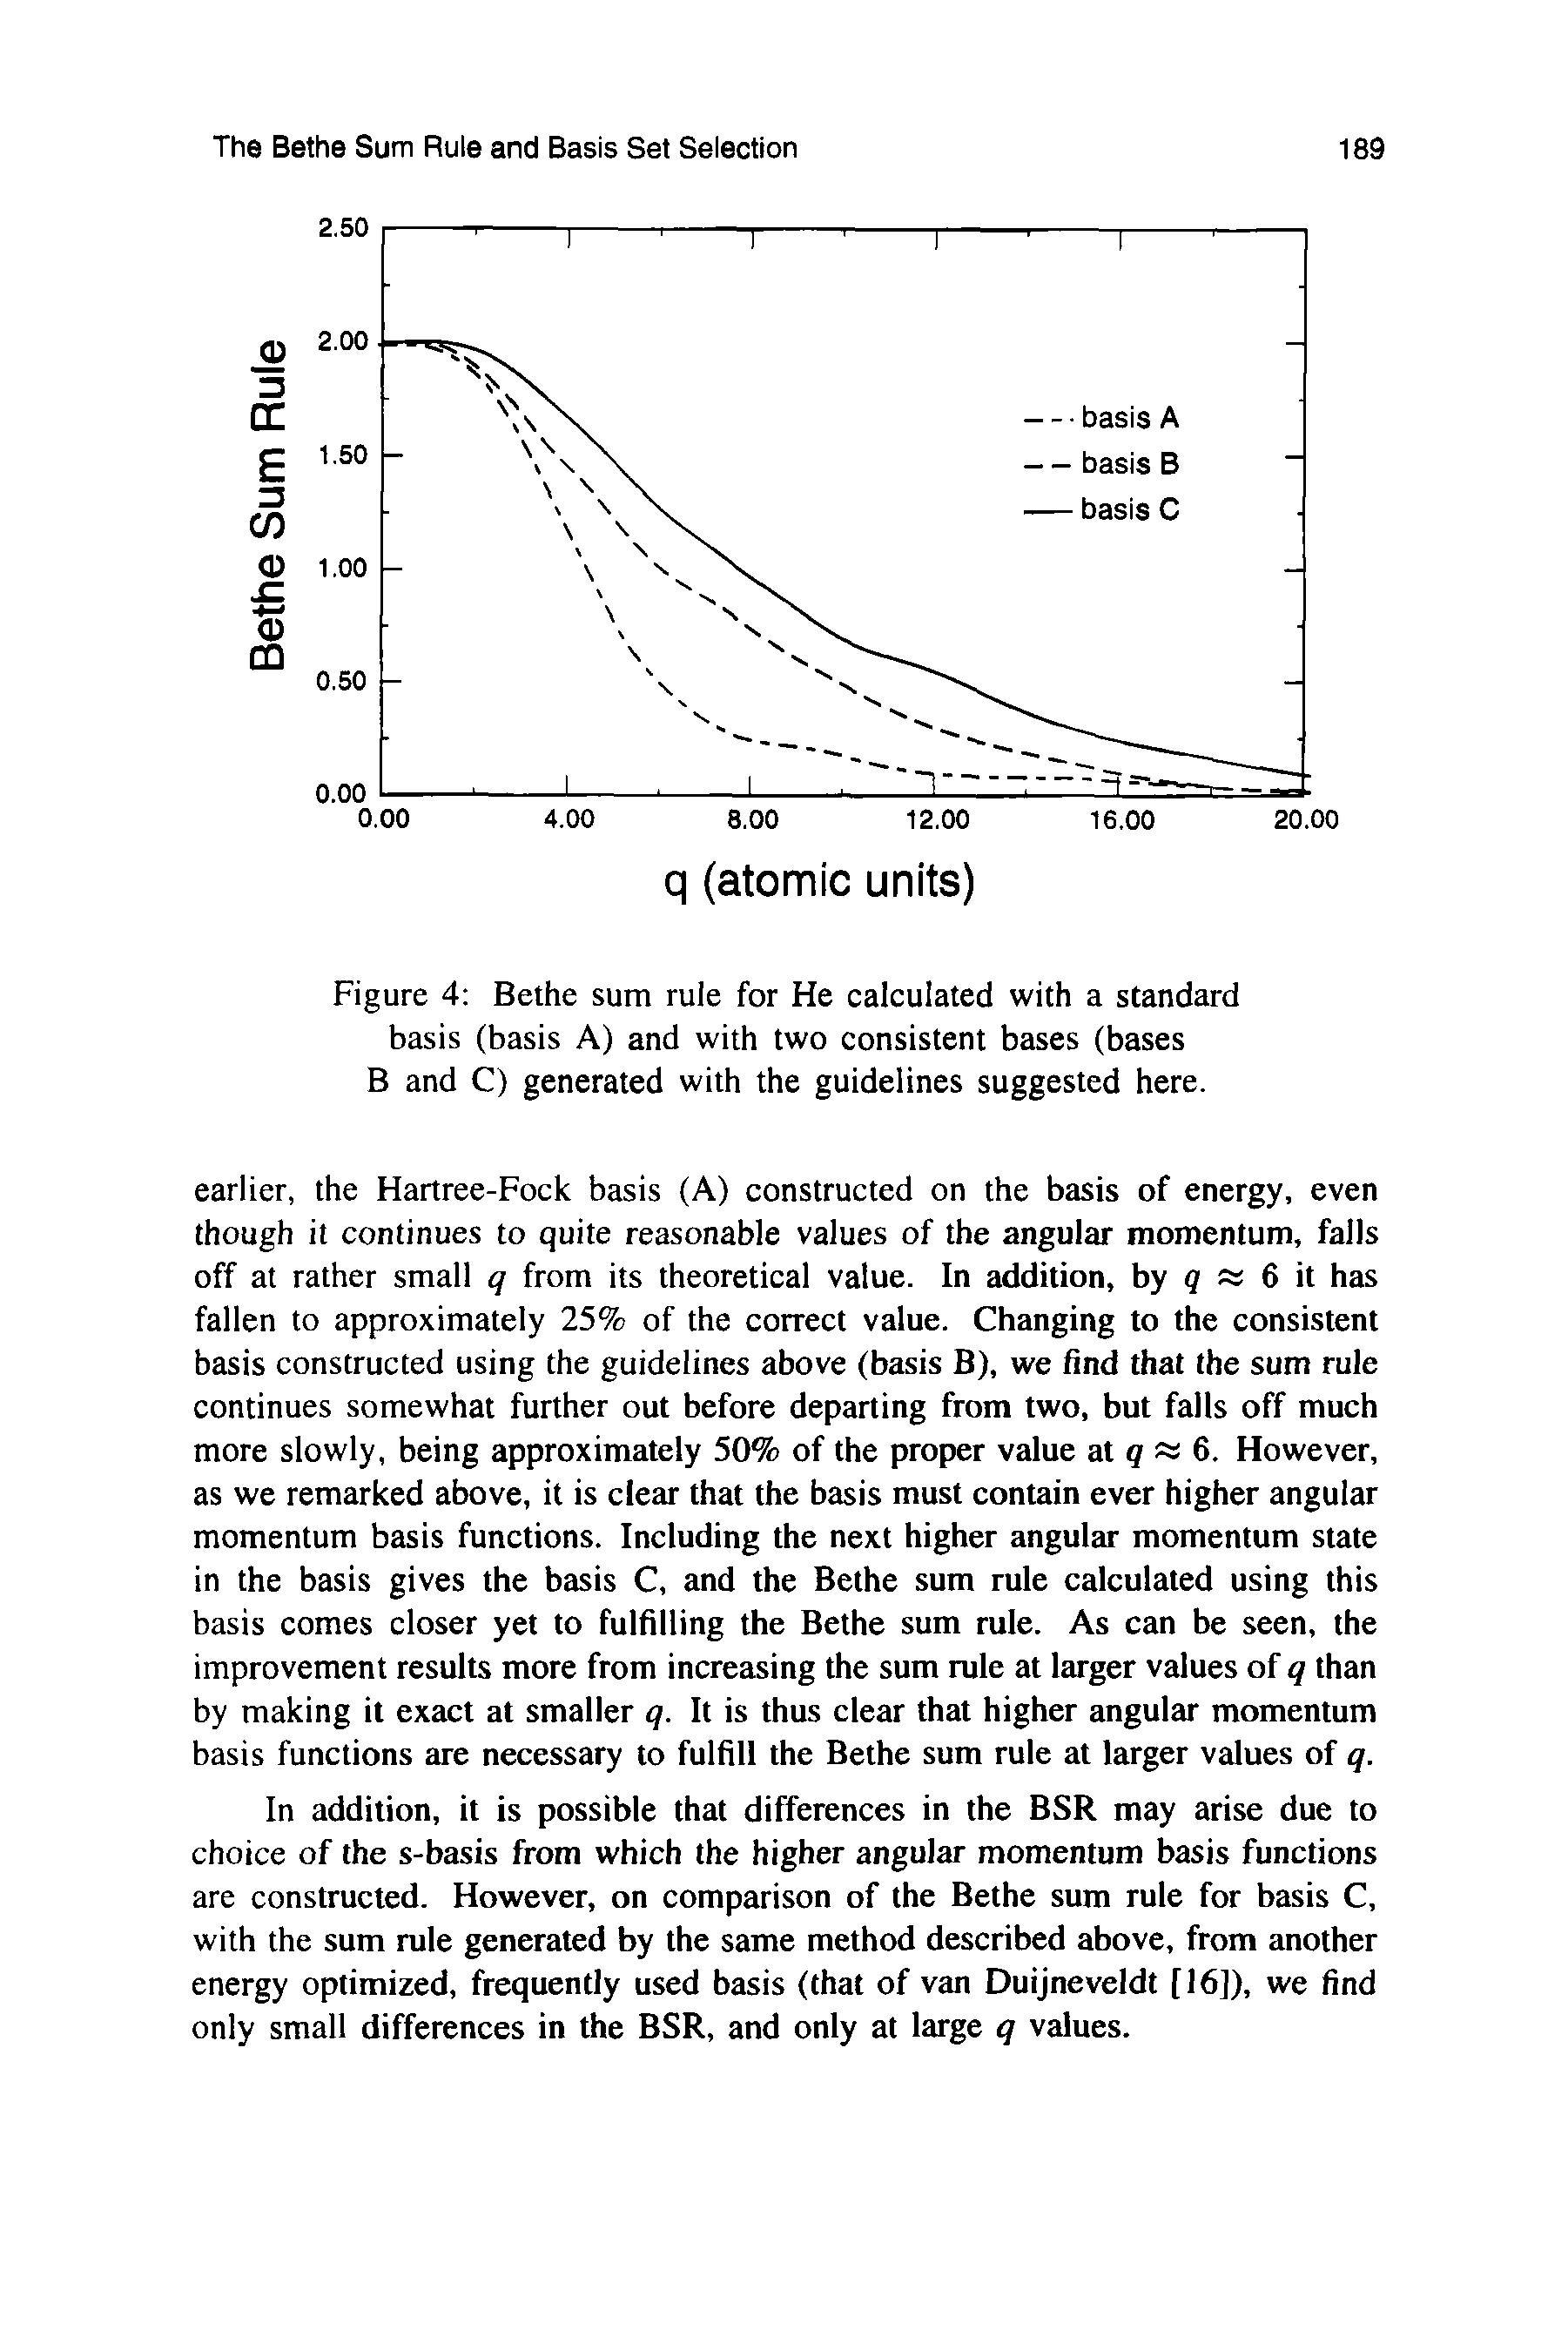 Figure 4 Bethe sum rule for He ealculated with a standard basis (basis A) and with two consistent bases (bases B and C) generated with the guidelines suggested here.